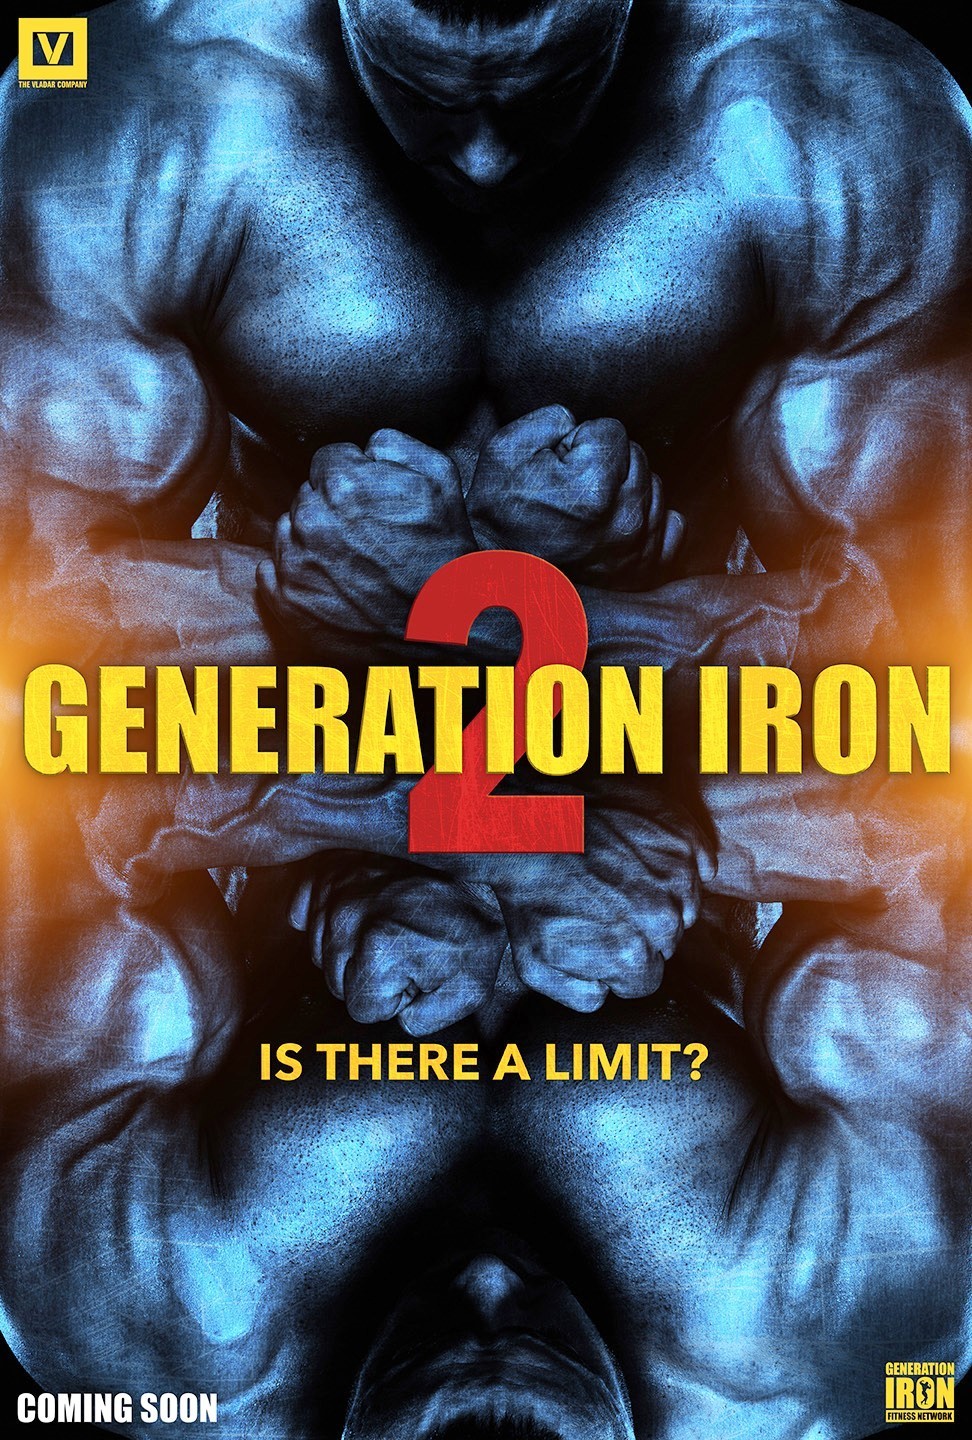 Poster of The Vladar Company's Generation Iron 2 (2017)